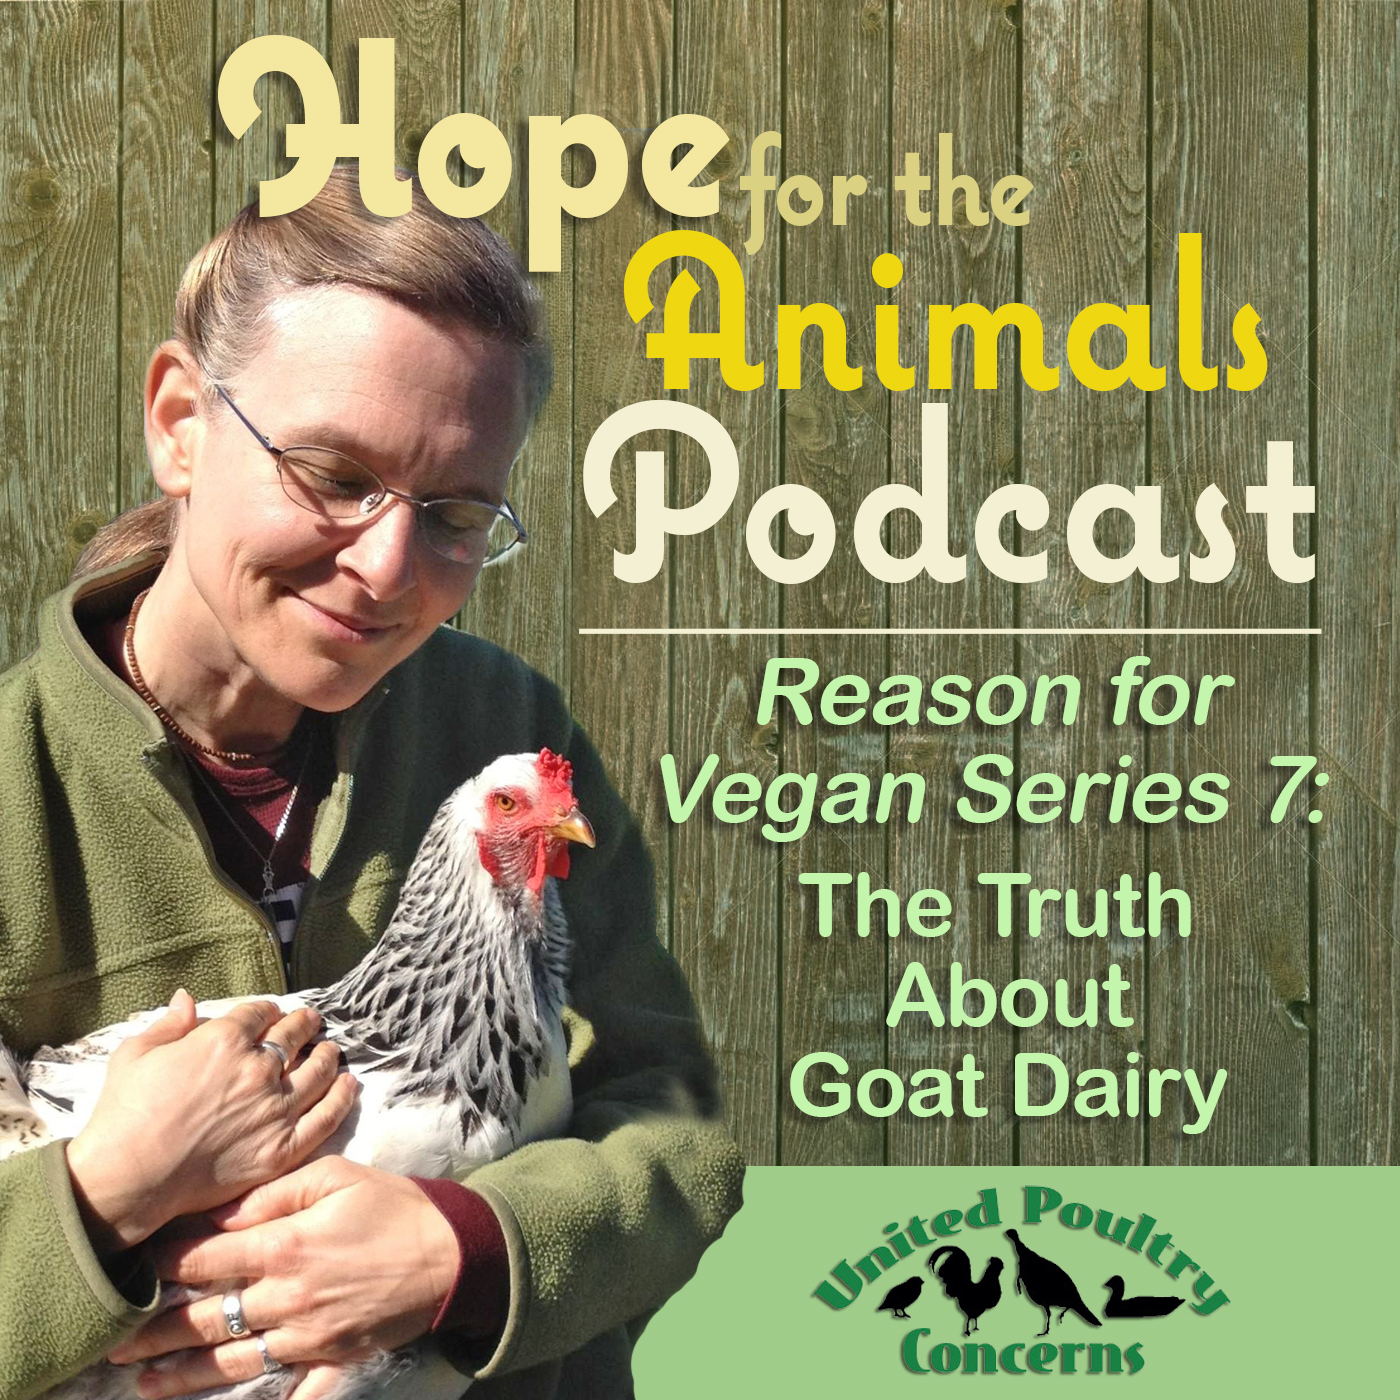 Reason for Vegan Series 7: The Truth About Goat Dairy